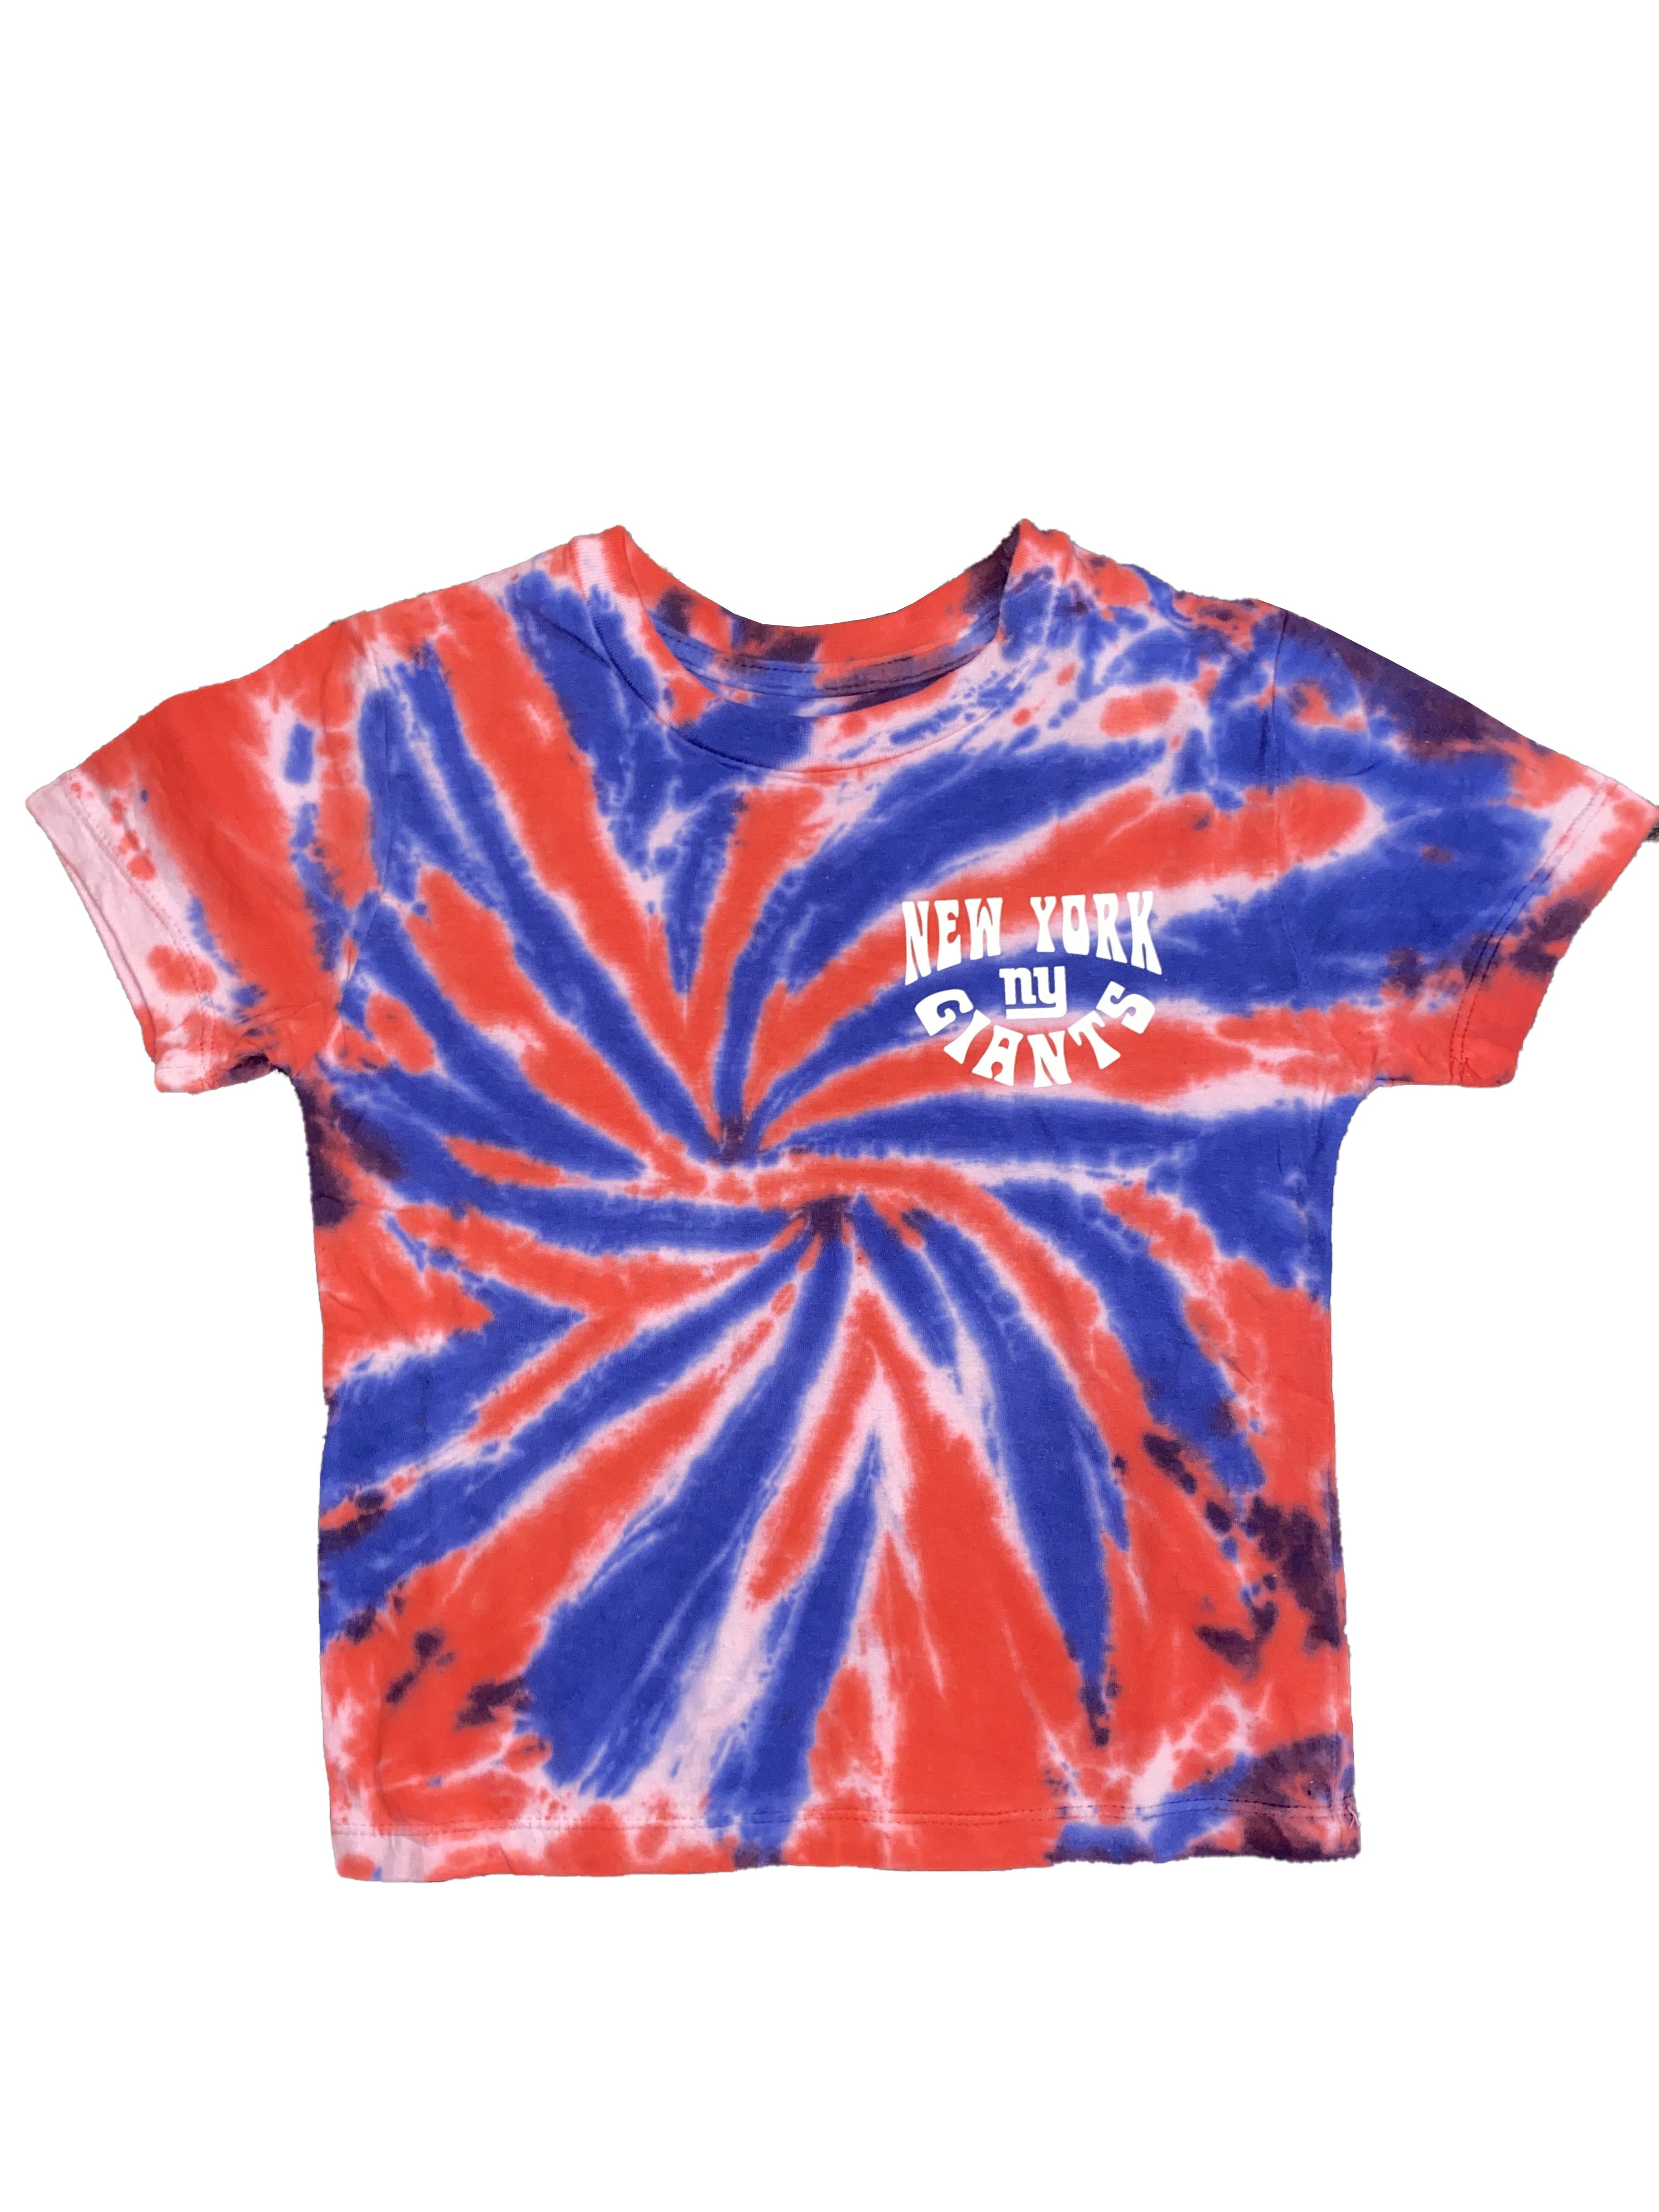 Outerstuff New York Giants Youth Pennant Tie Dye T-Shirt 21 / S